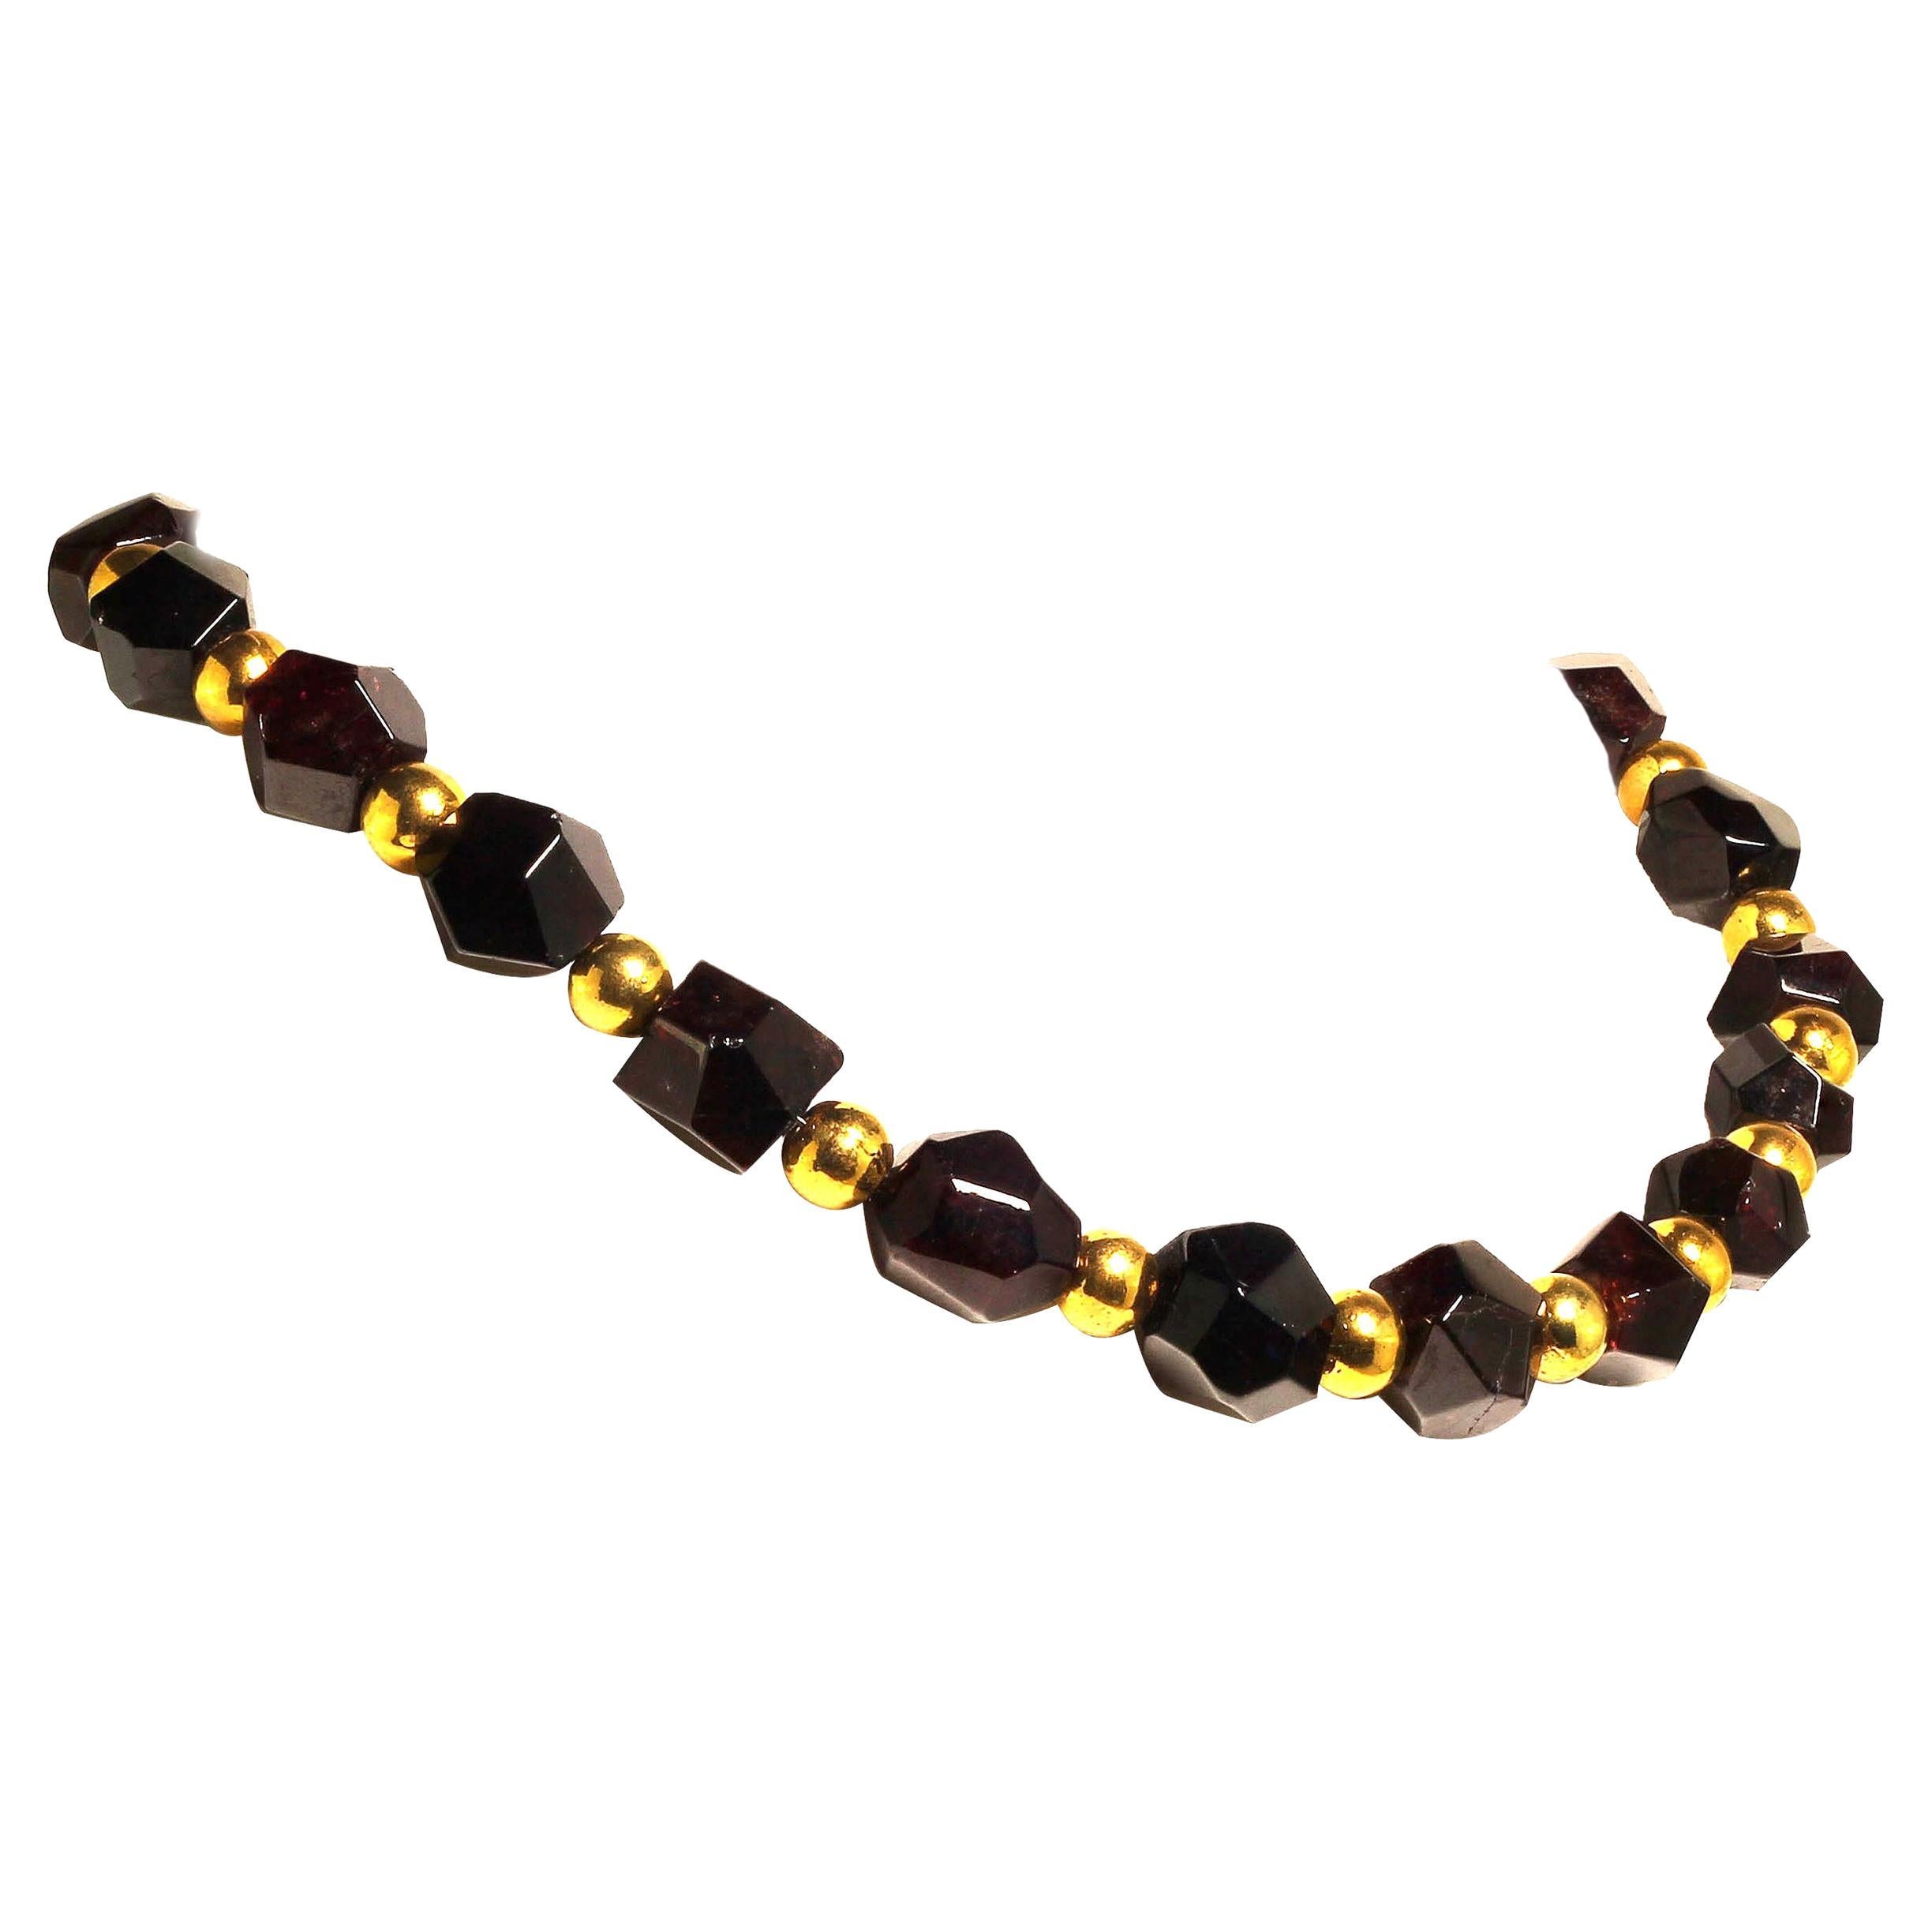 AJD 1nch 7 IPolished Red Garnet Crystals Accented with Gold Necklace